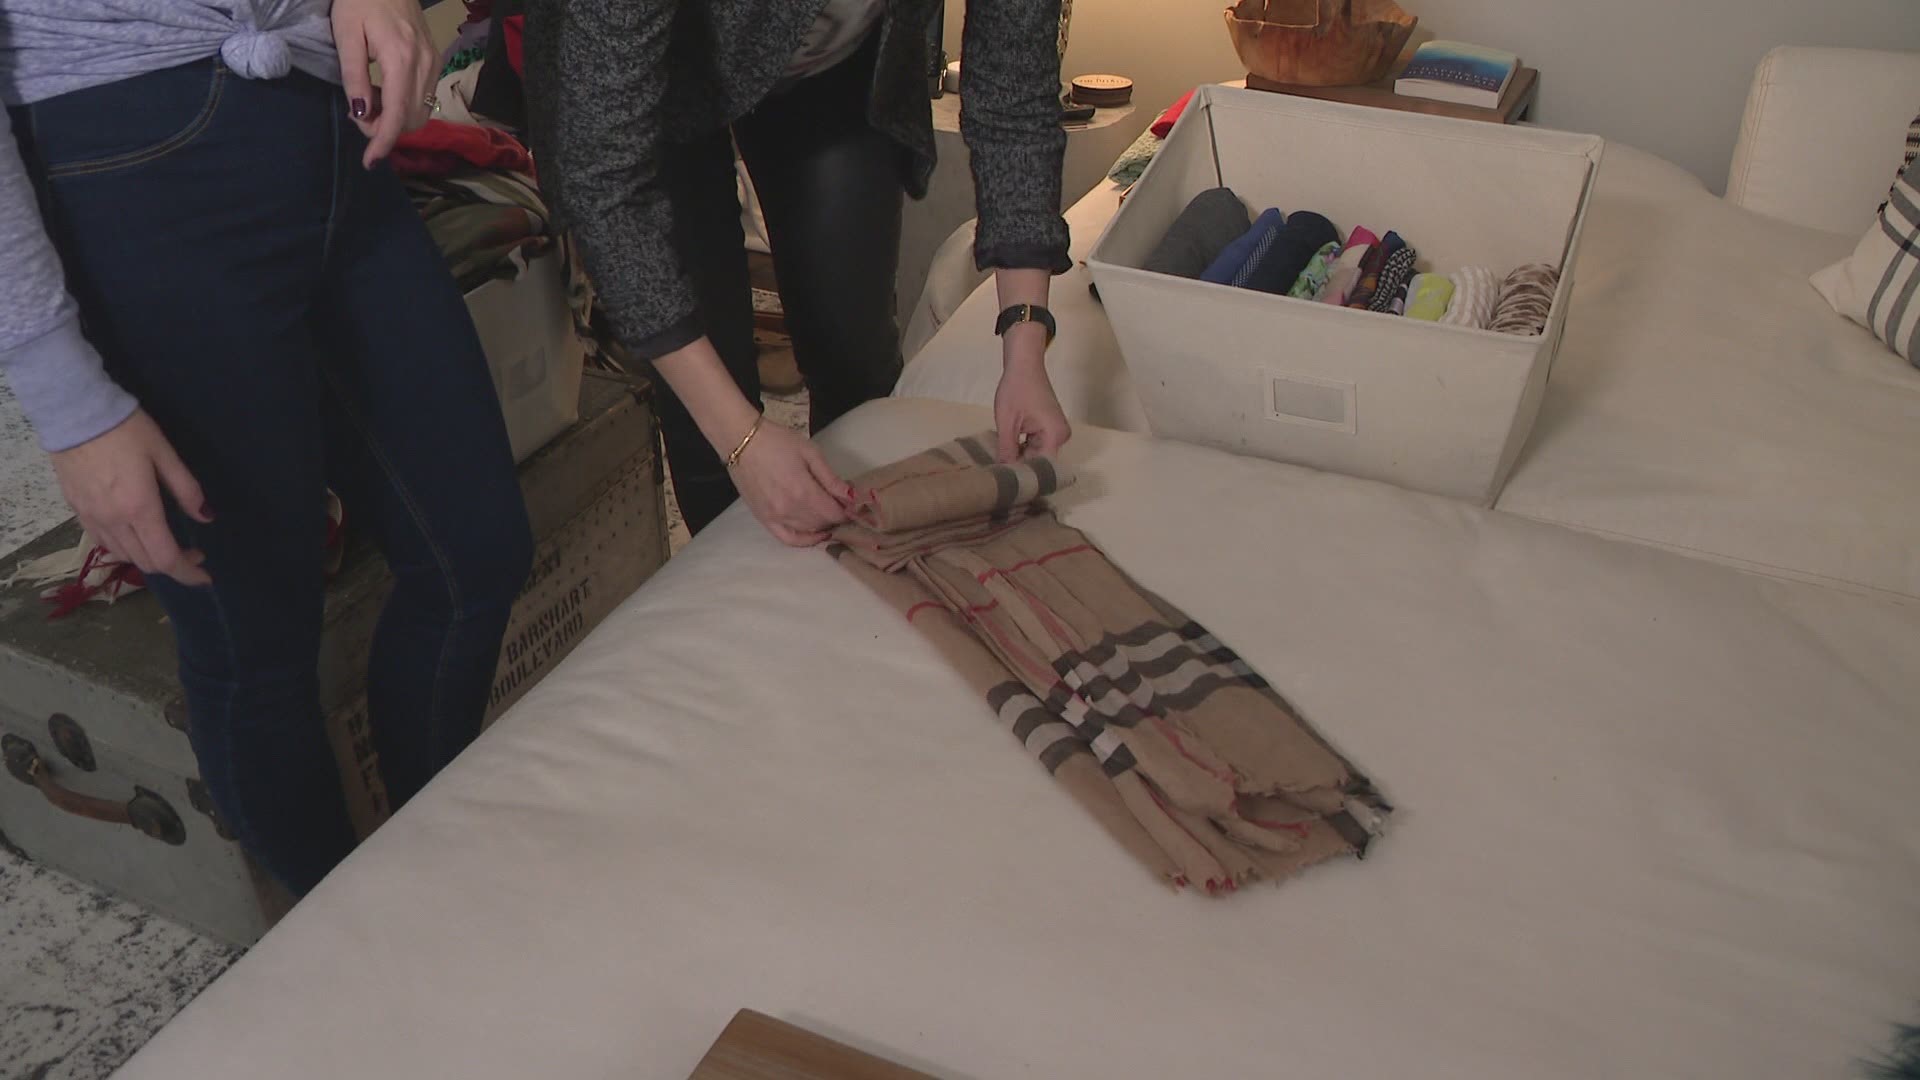 April 30, 2019: Got scarves? Watch Elana Mintz's foolproof way to fold and organize your scarves.